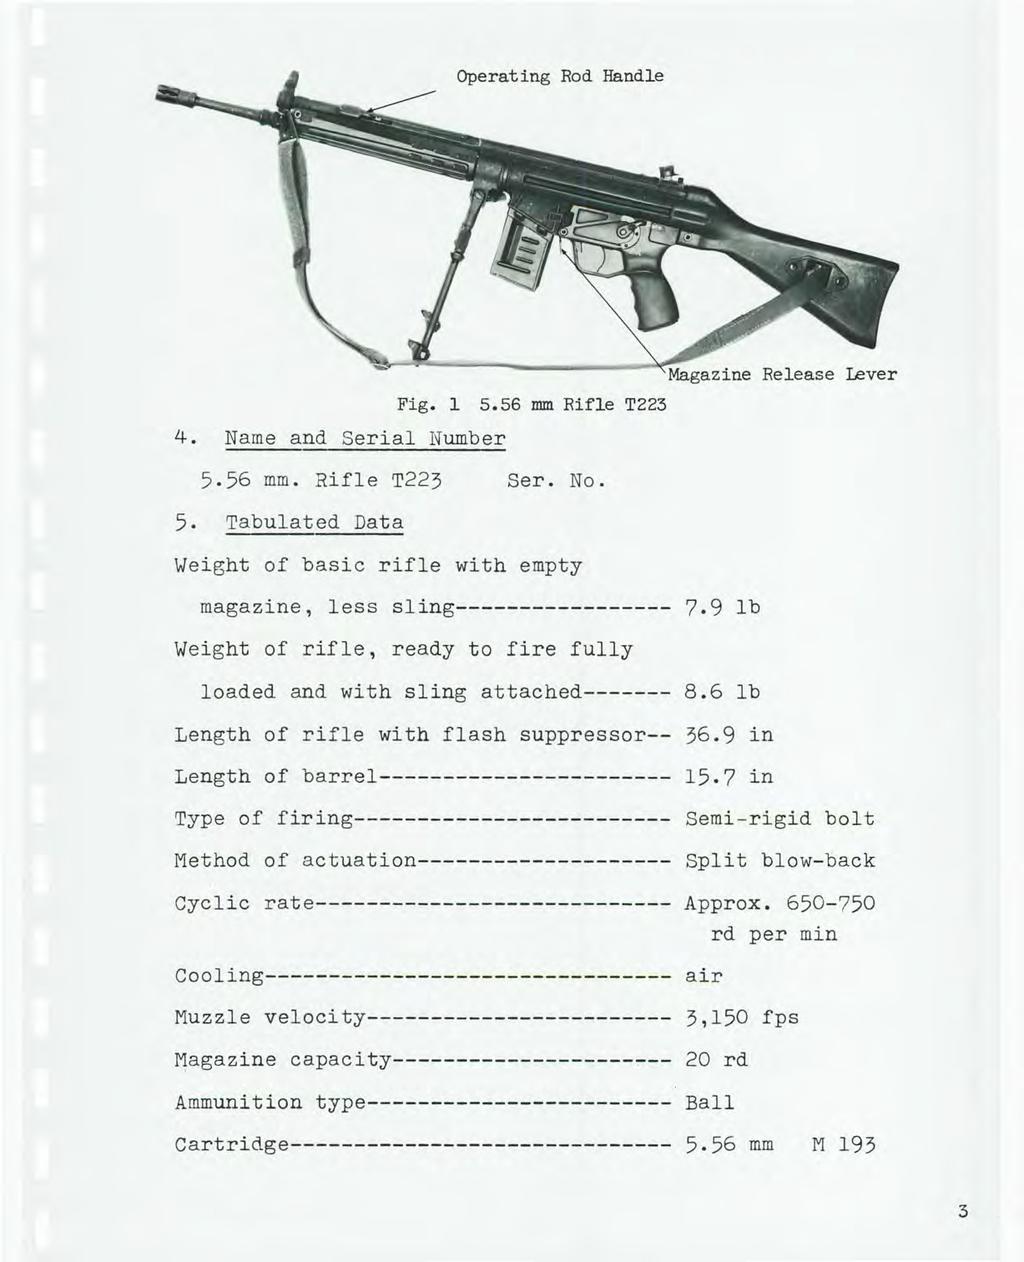 Operating Rod Handle Fig. 1 4. Name and Serial Number 5.56 mm Rifle T223 Release lever 5.56 rnm. Rifle T223 Ser. No. 5. Tabulated Data Weight of basic rifle with empty magazine, less sling----------------- 7.